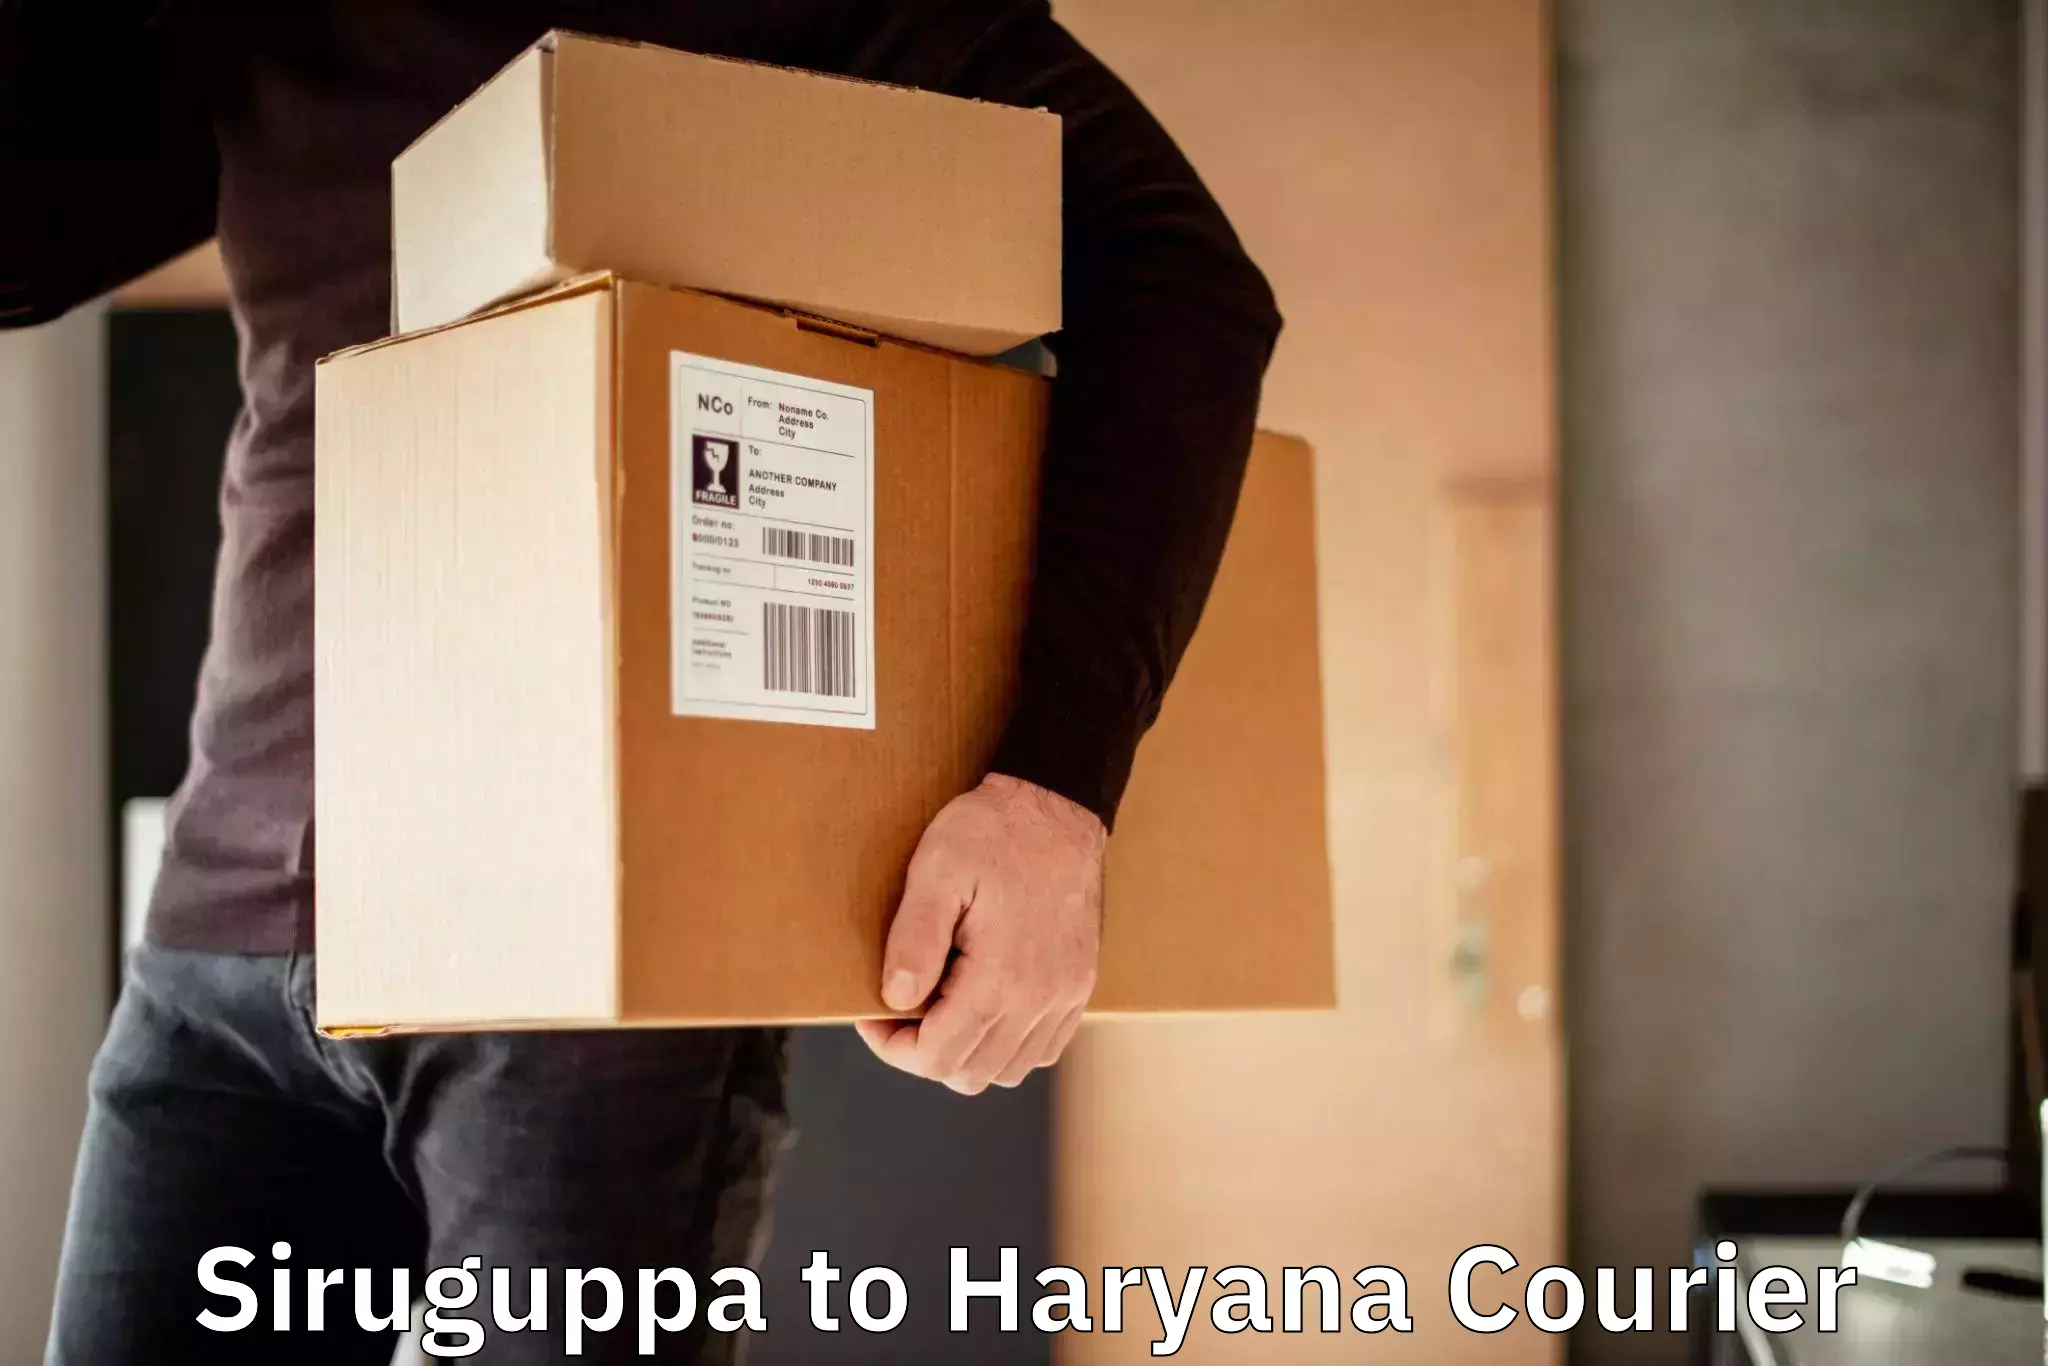 Global courier networks Siruguppa to Hansi